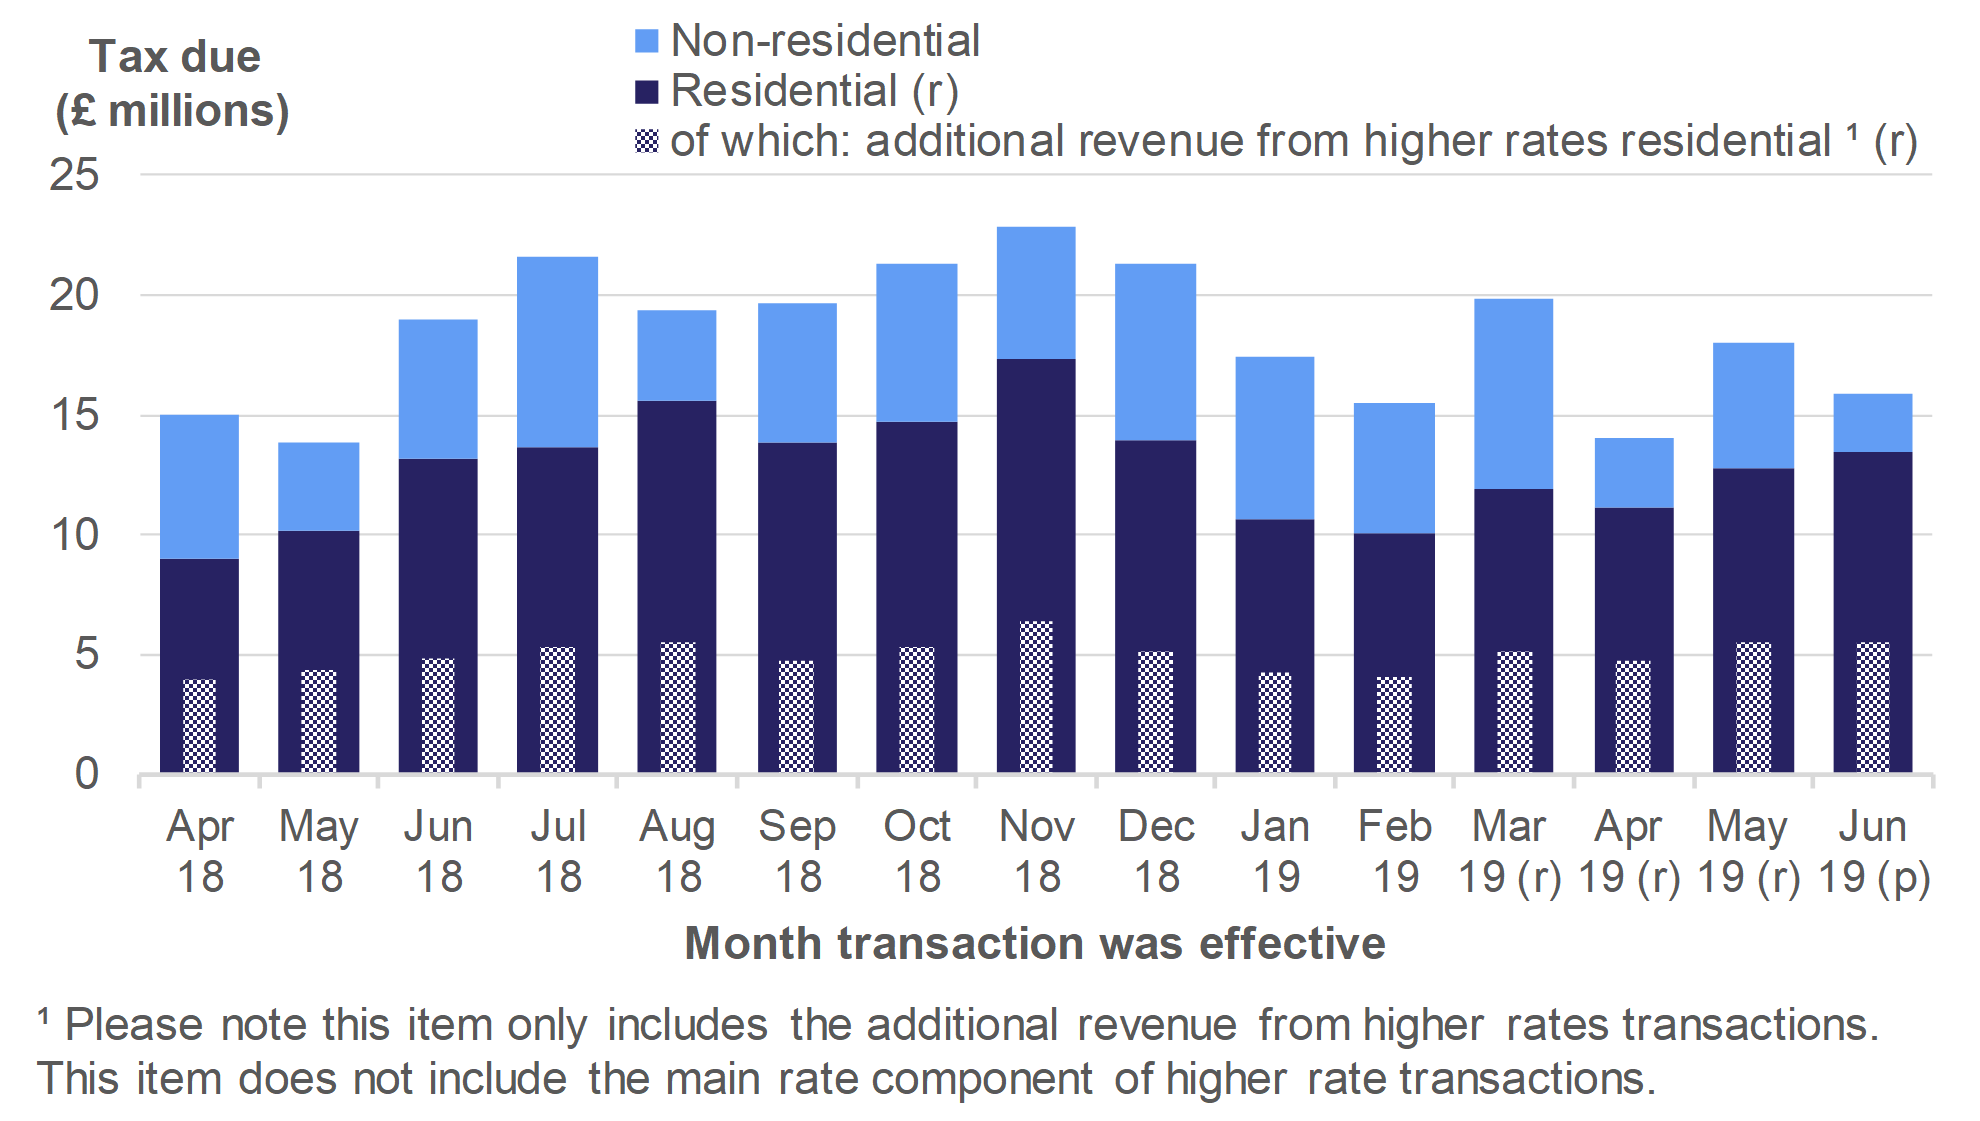 Figure 2.5 shows the monthly amount of tax due on reported notifiable transactions from April 2018 to June 2019, for residential and non-residential transactions.